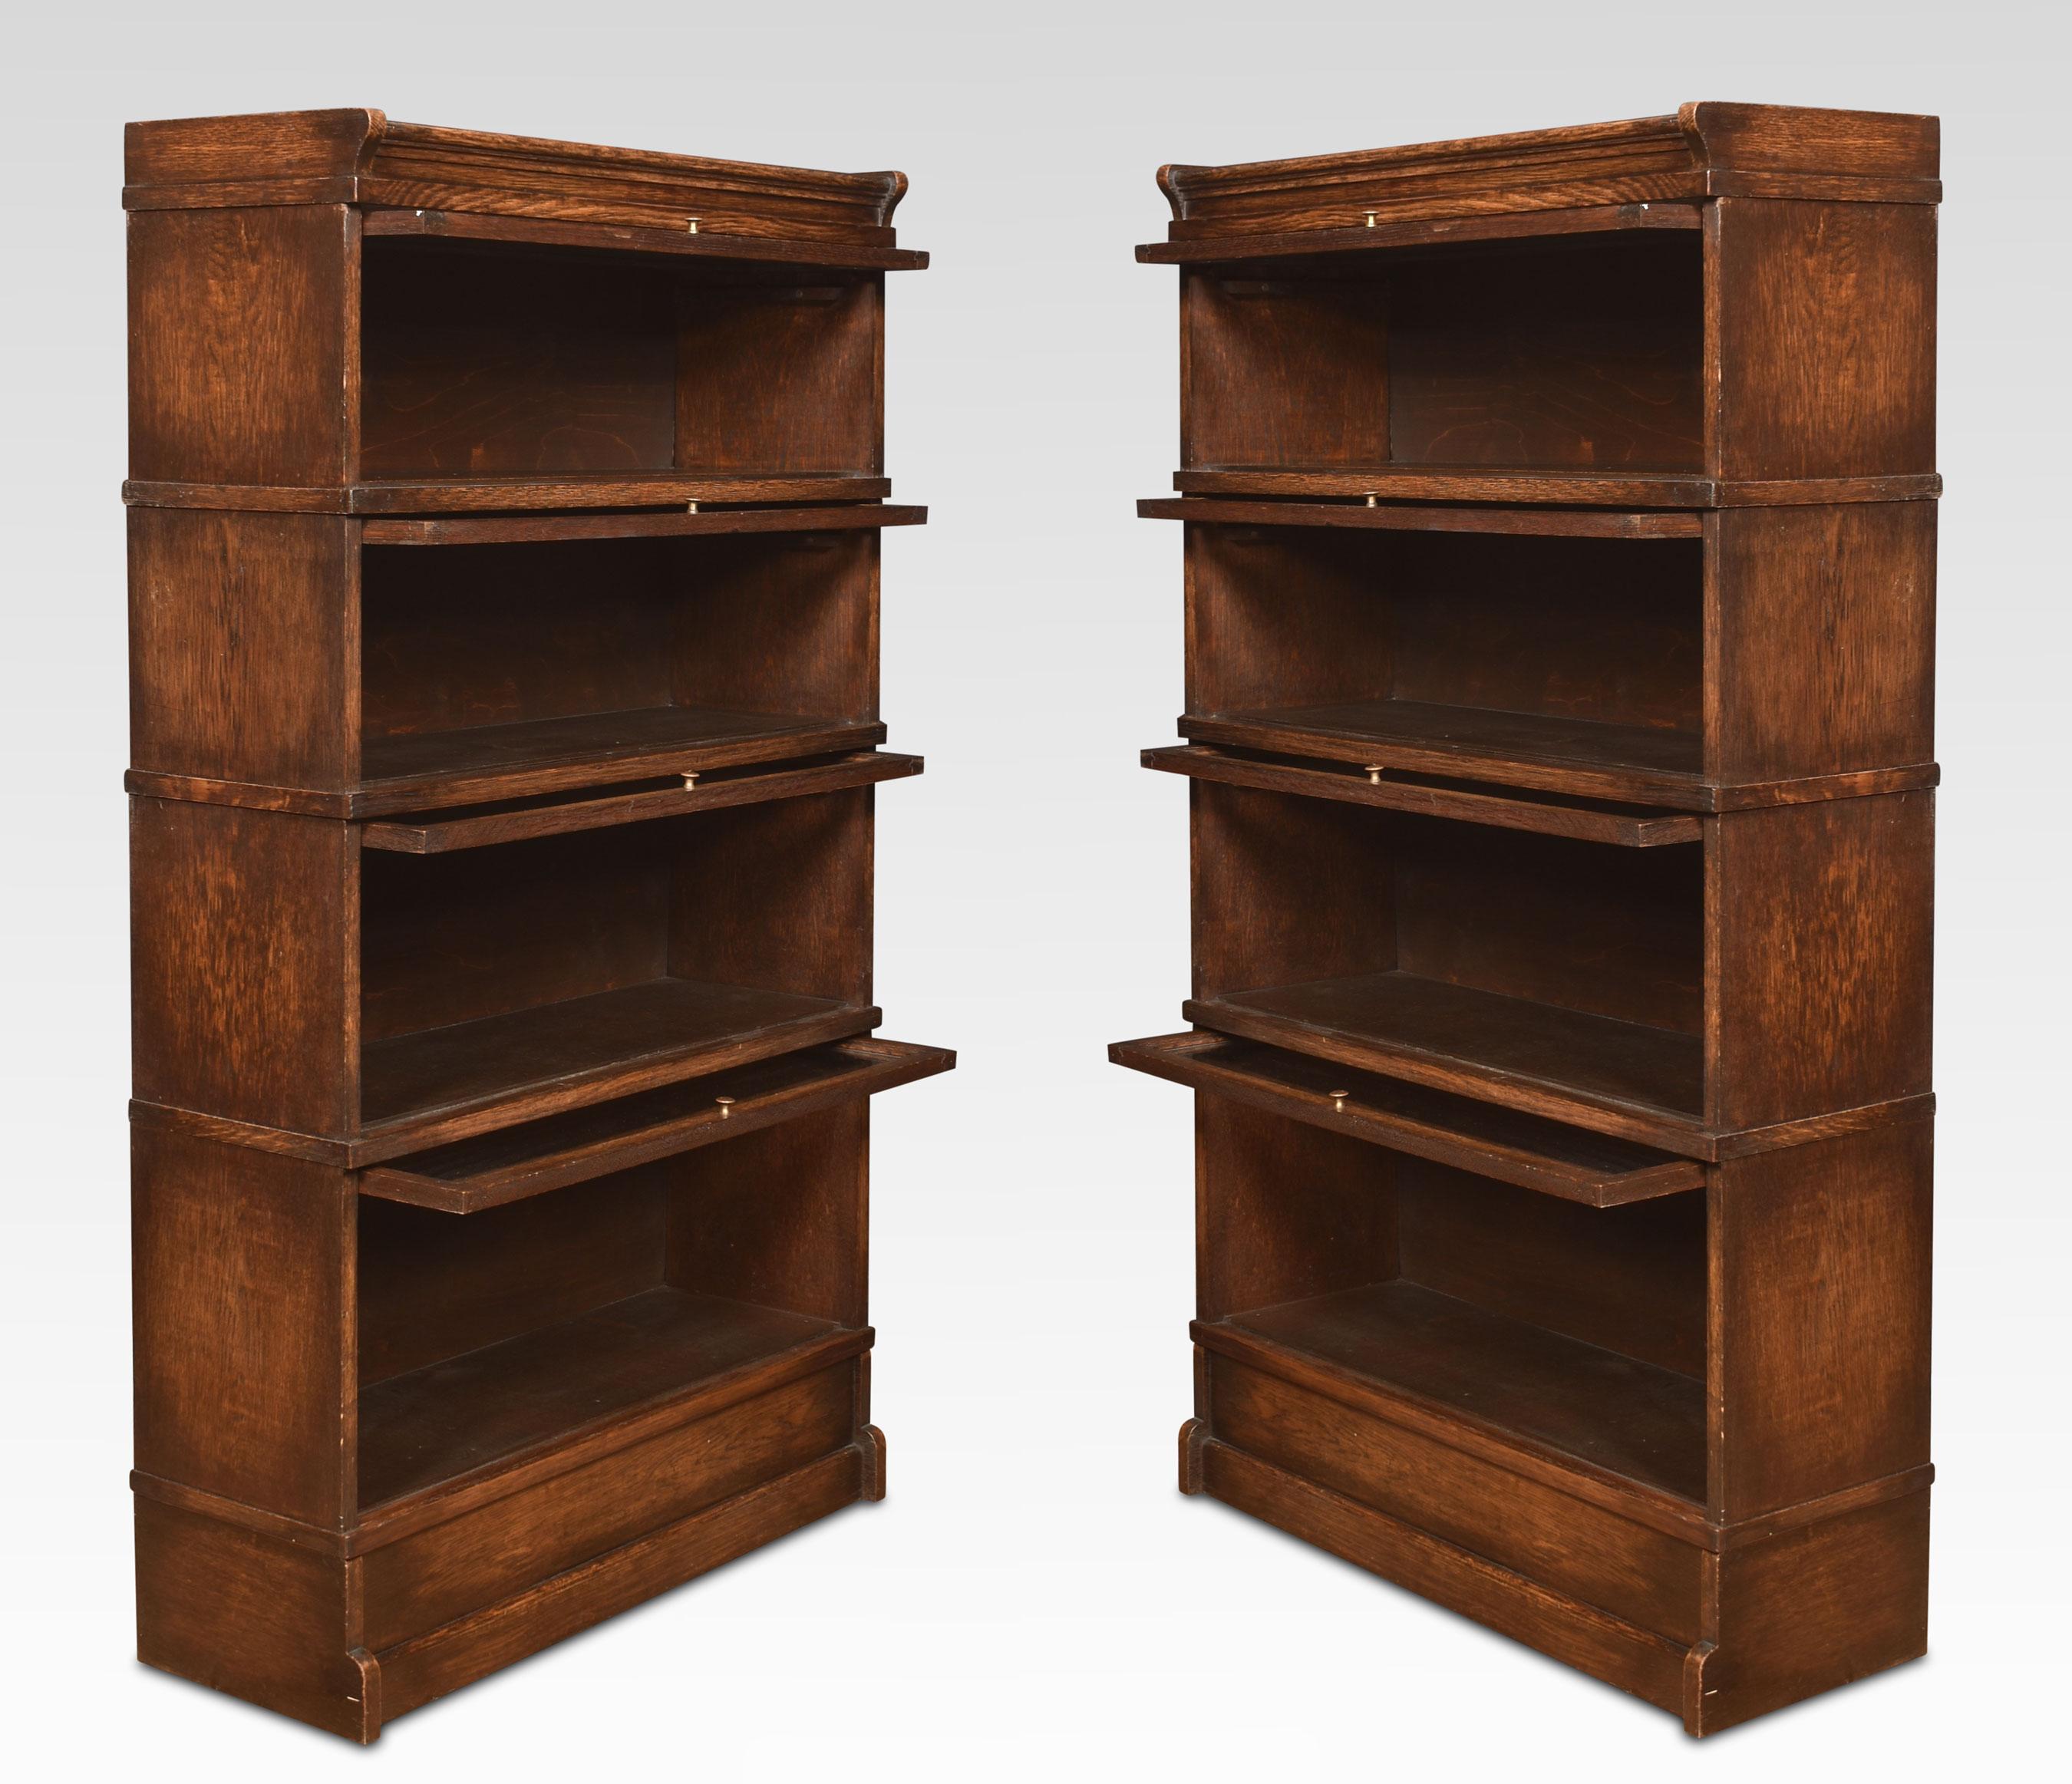 Pair of oak sectional bookcases the moulded top above four graduated sections all having glazed doors. Raised up on plinth base.
Dimensions
Height 58.5 Inches
Width 34.5 Inches
Depth 12 Inches.